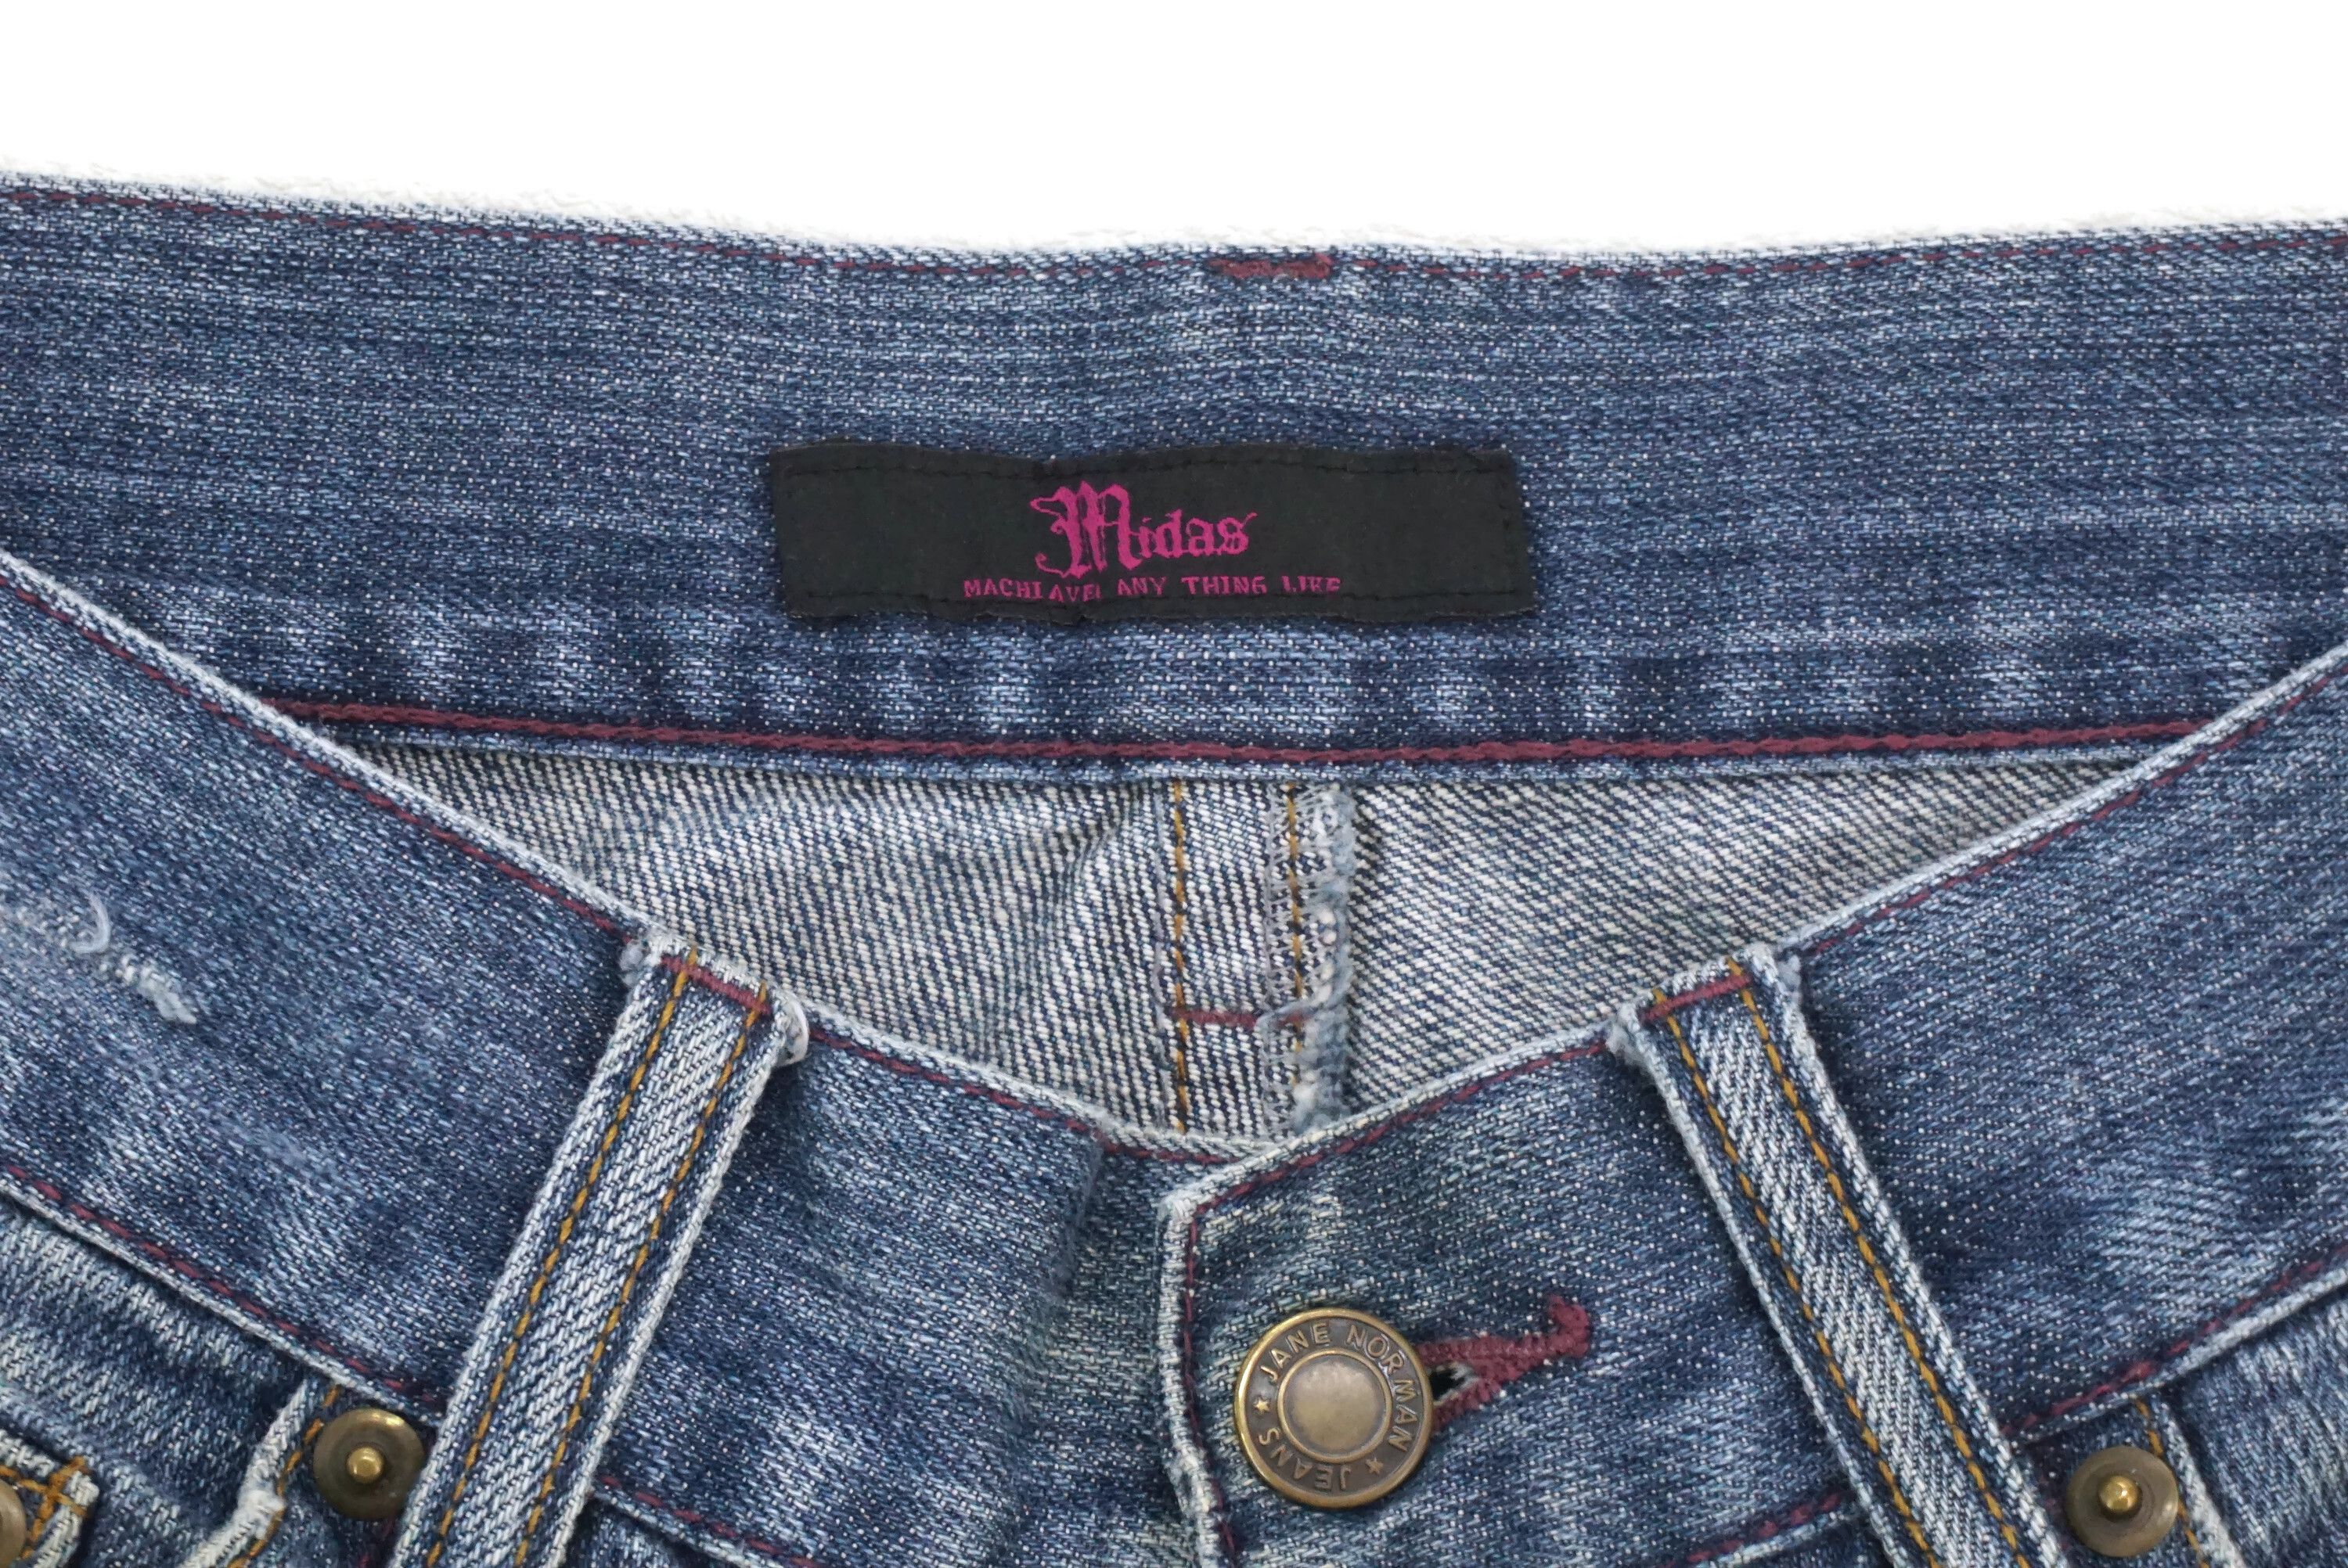 Distressed Denim Midas Jeans Bootcut Jeans Flare Jeans Japanese Distressed Size US 29 - 6 Thumbnail